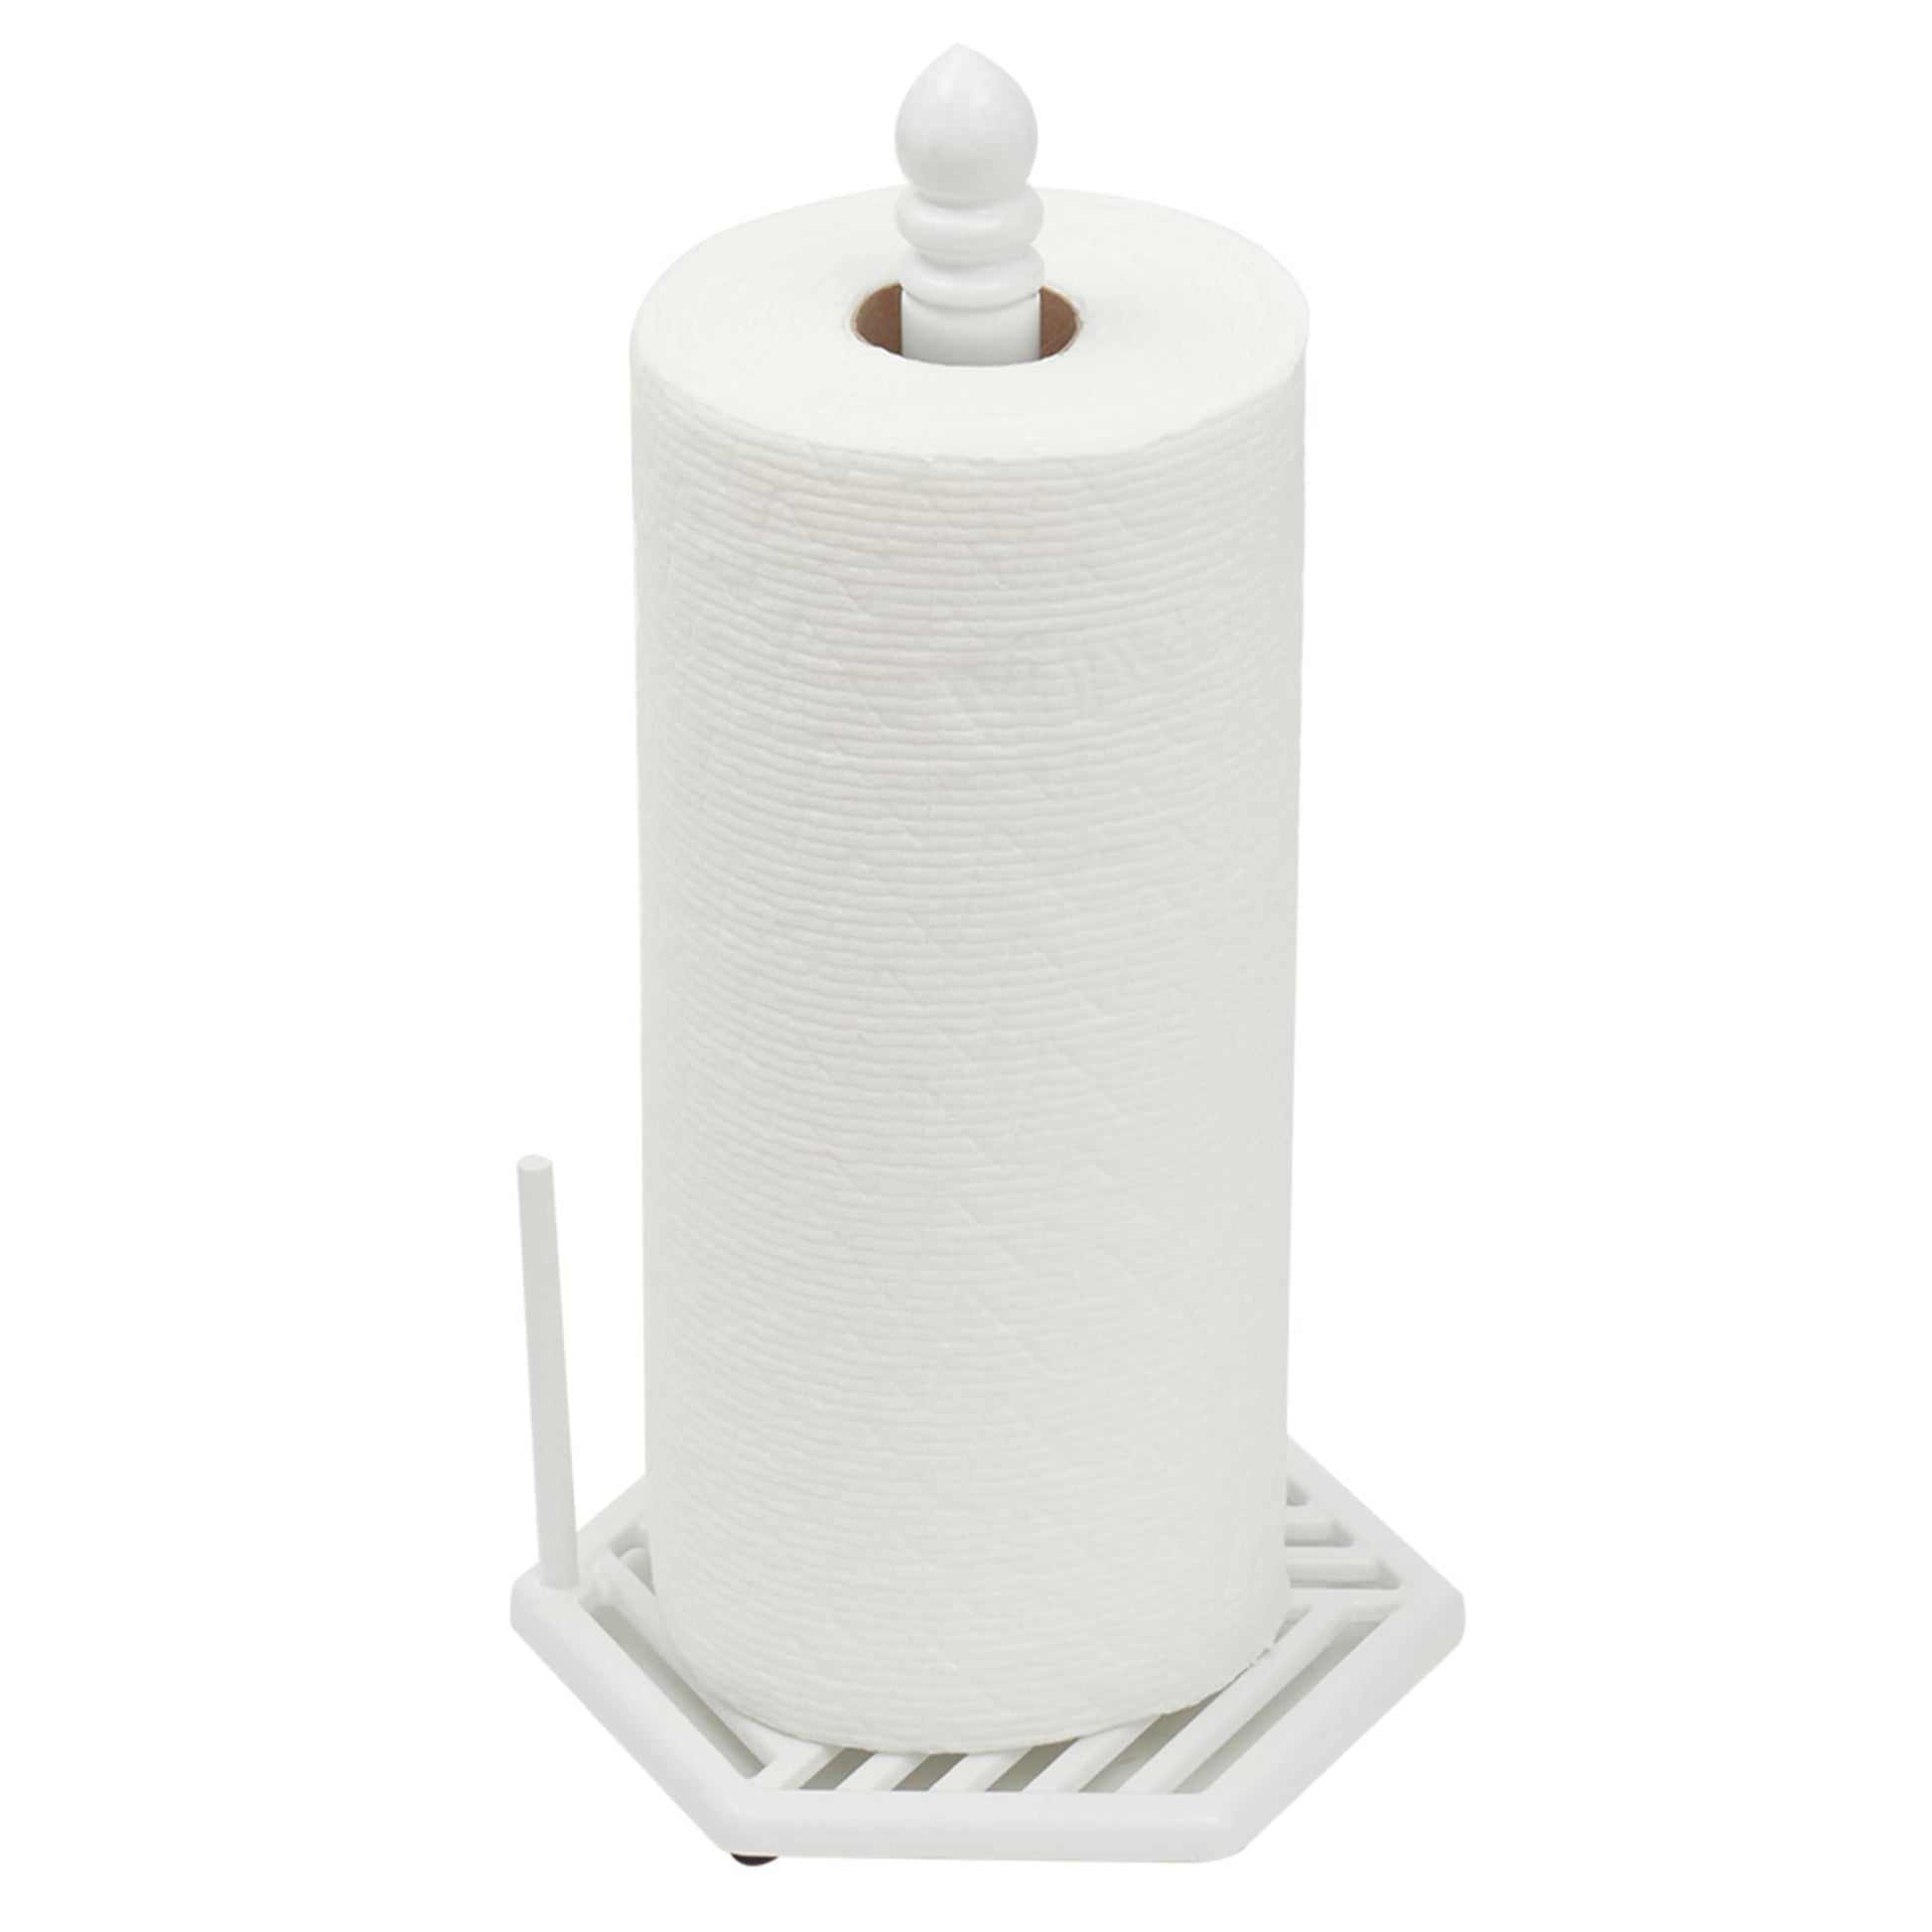 Home Basics Grove Free Standing Paper Towel Holder with Weighted Base and Padded Base, White